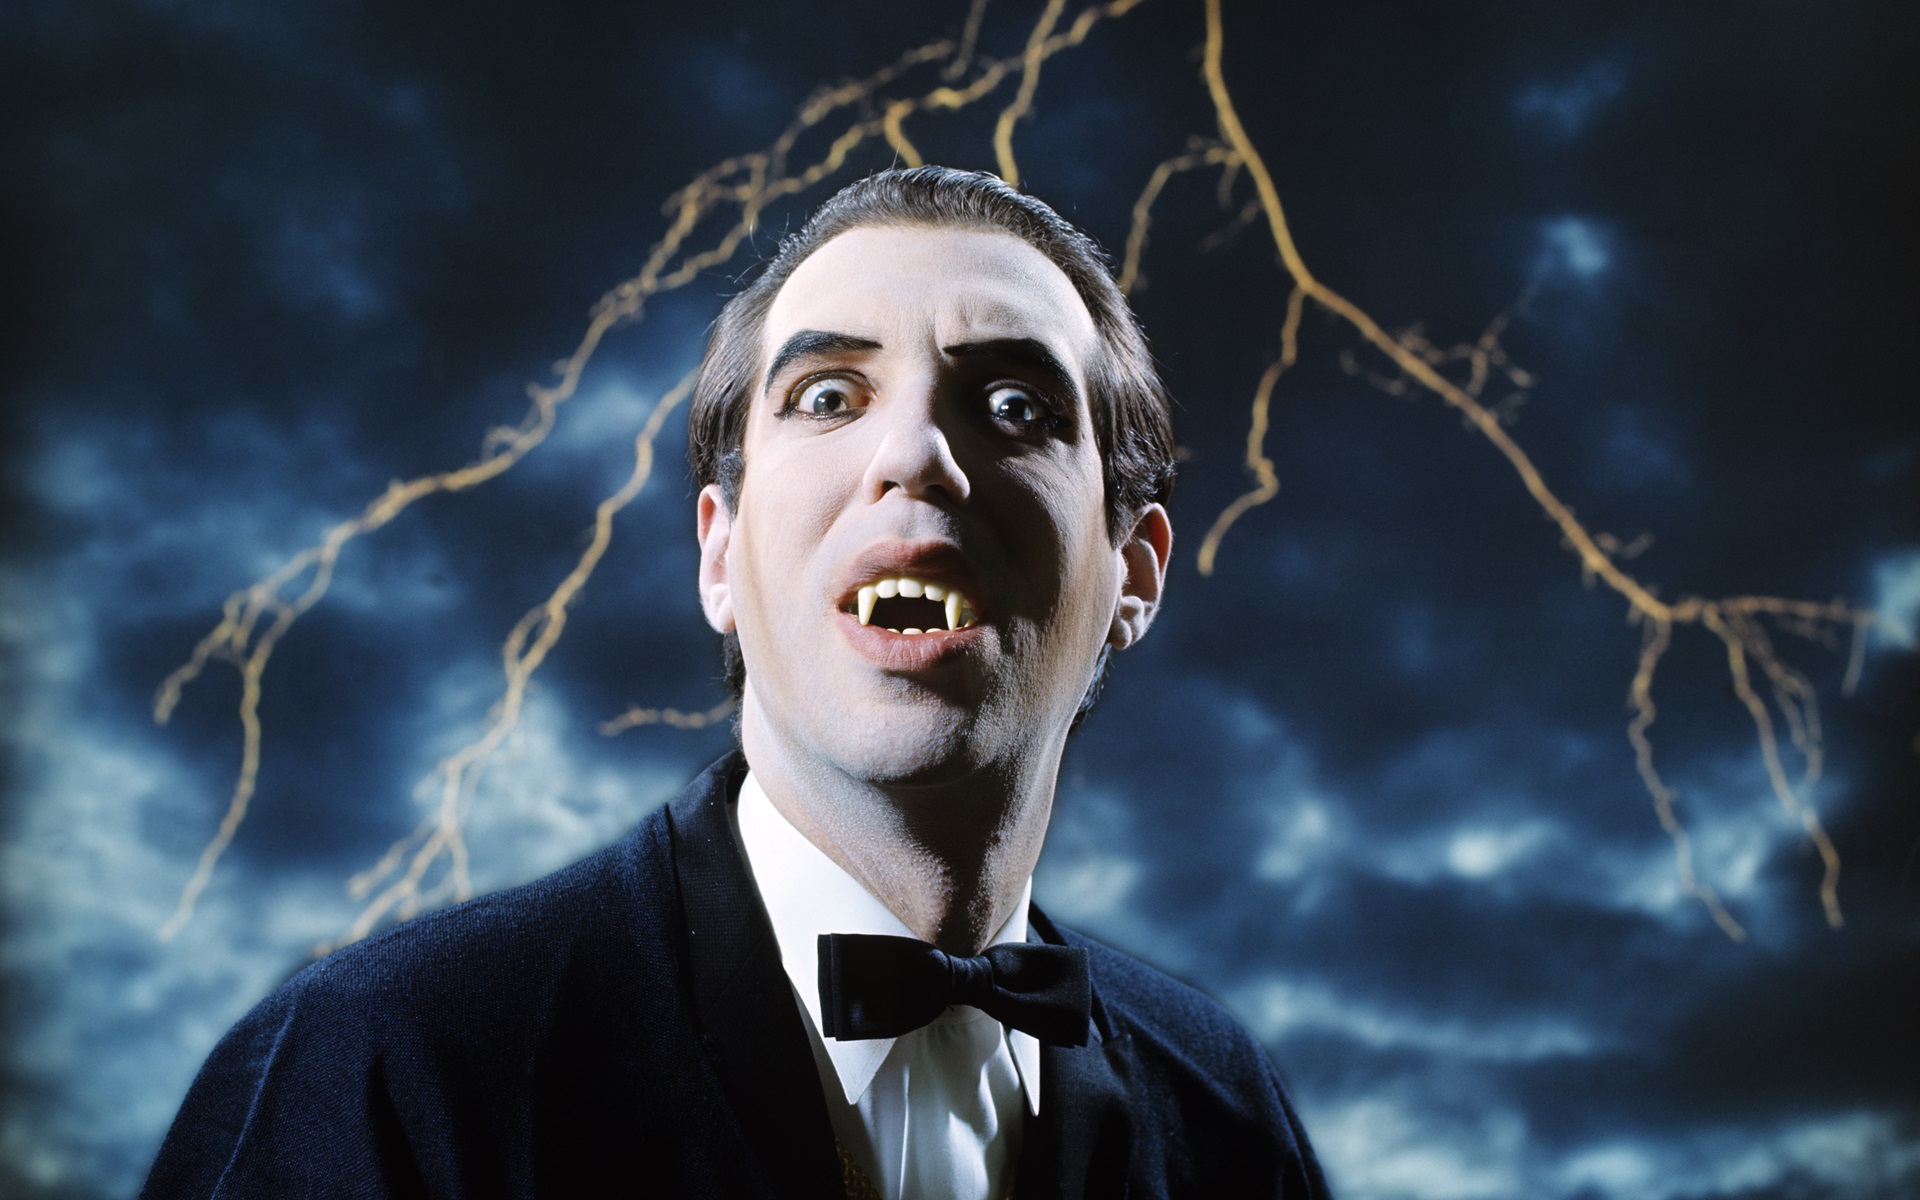 Did Dracula have a blood condition? Scientists think they know the answer